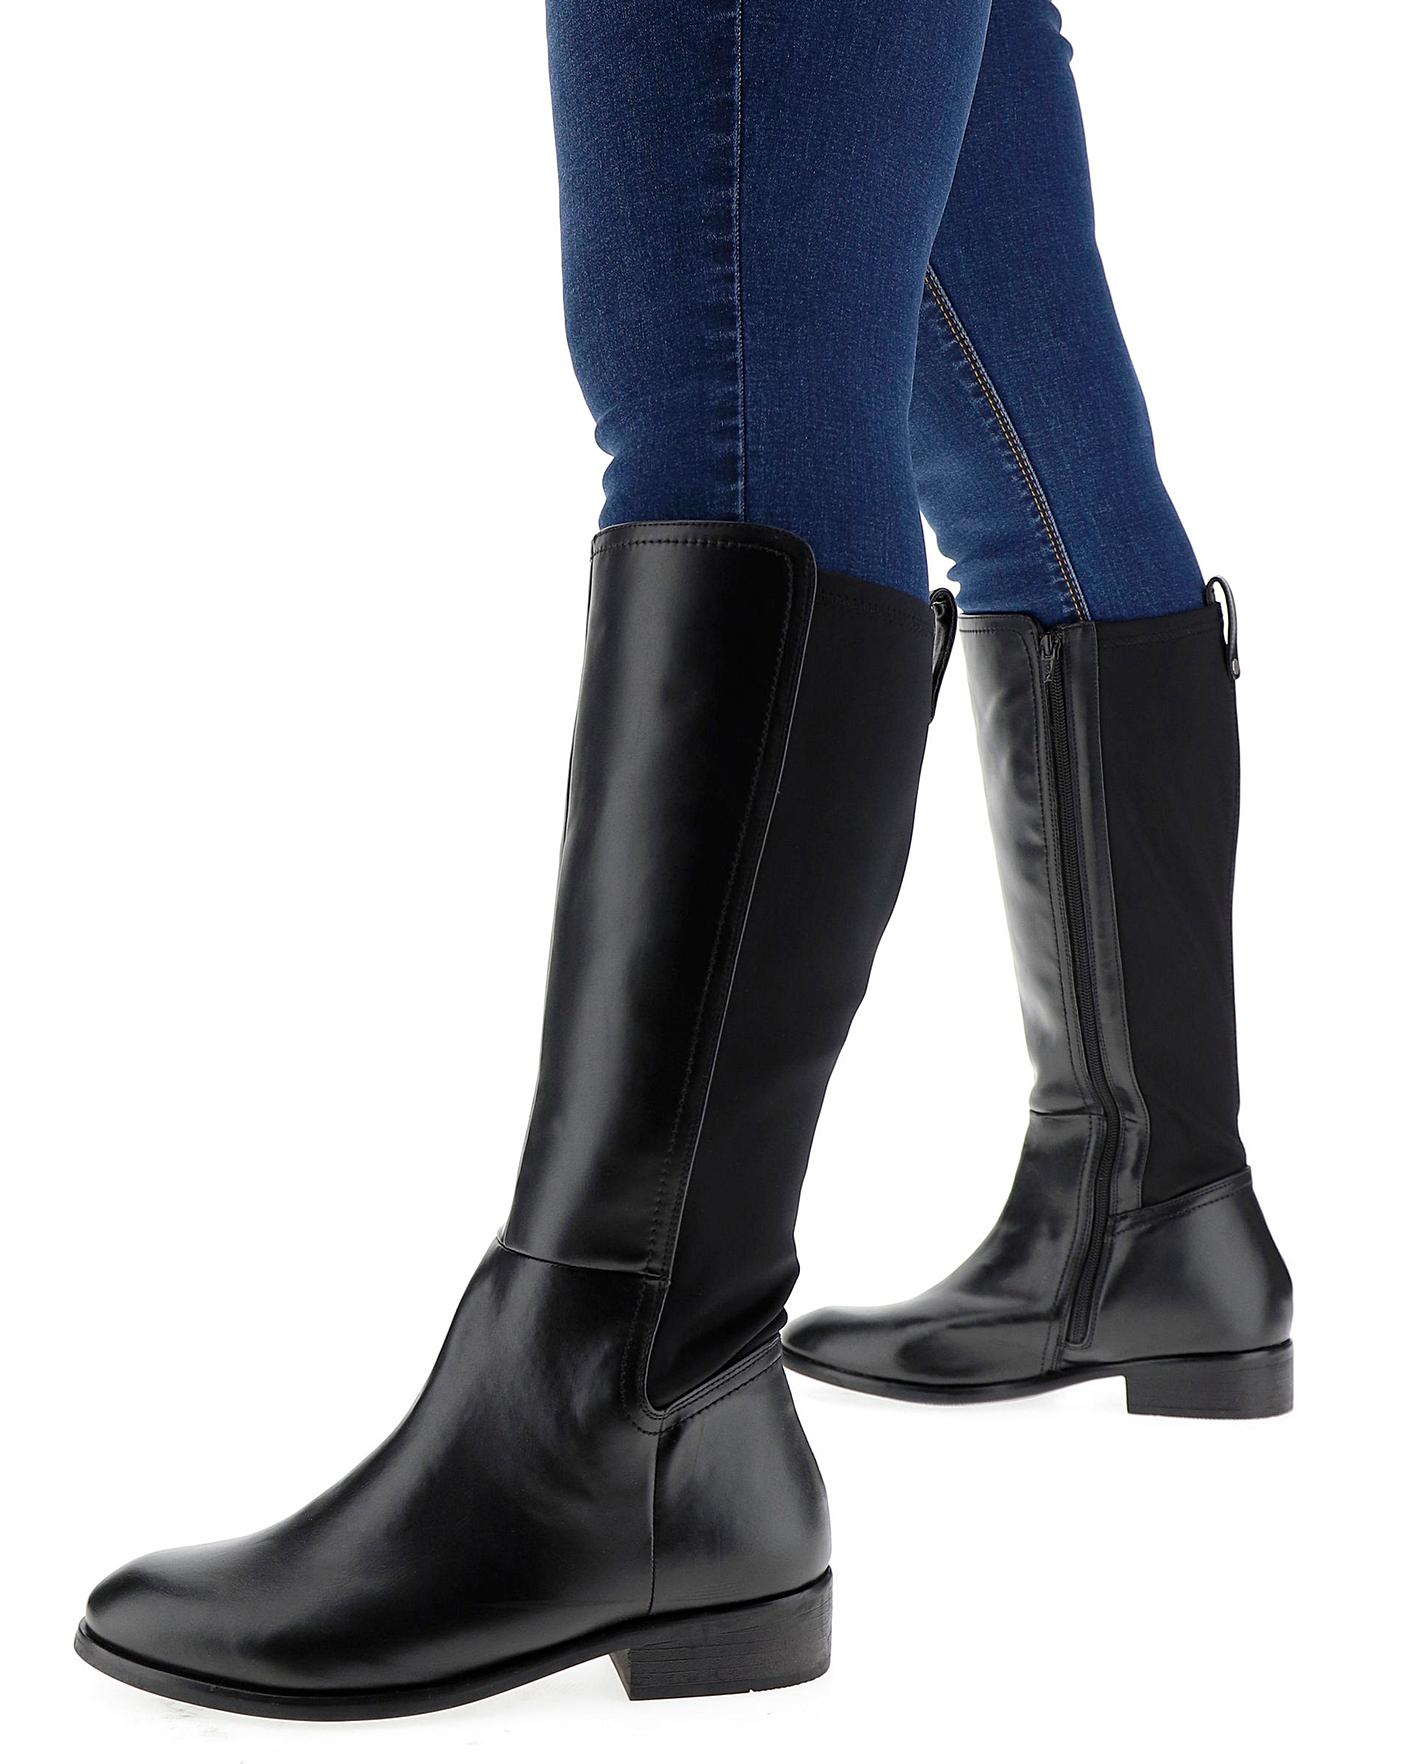 jd williams knee high boots